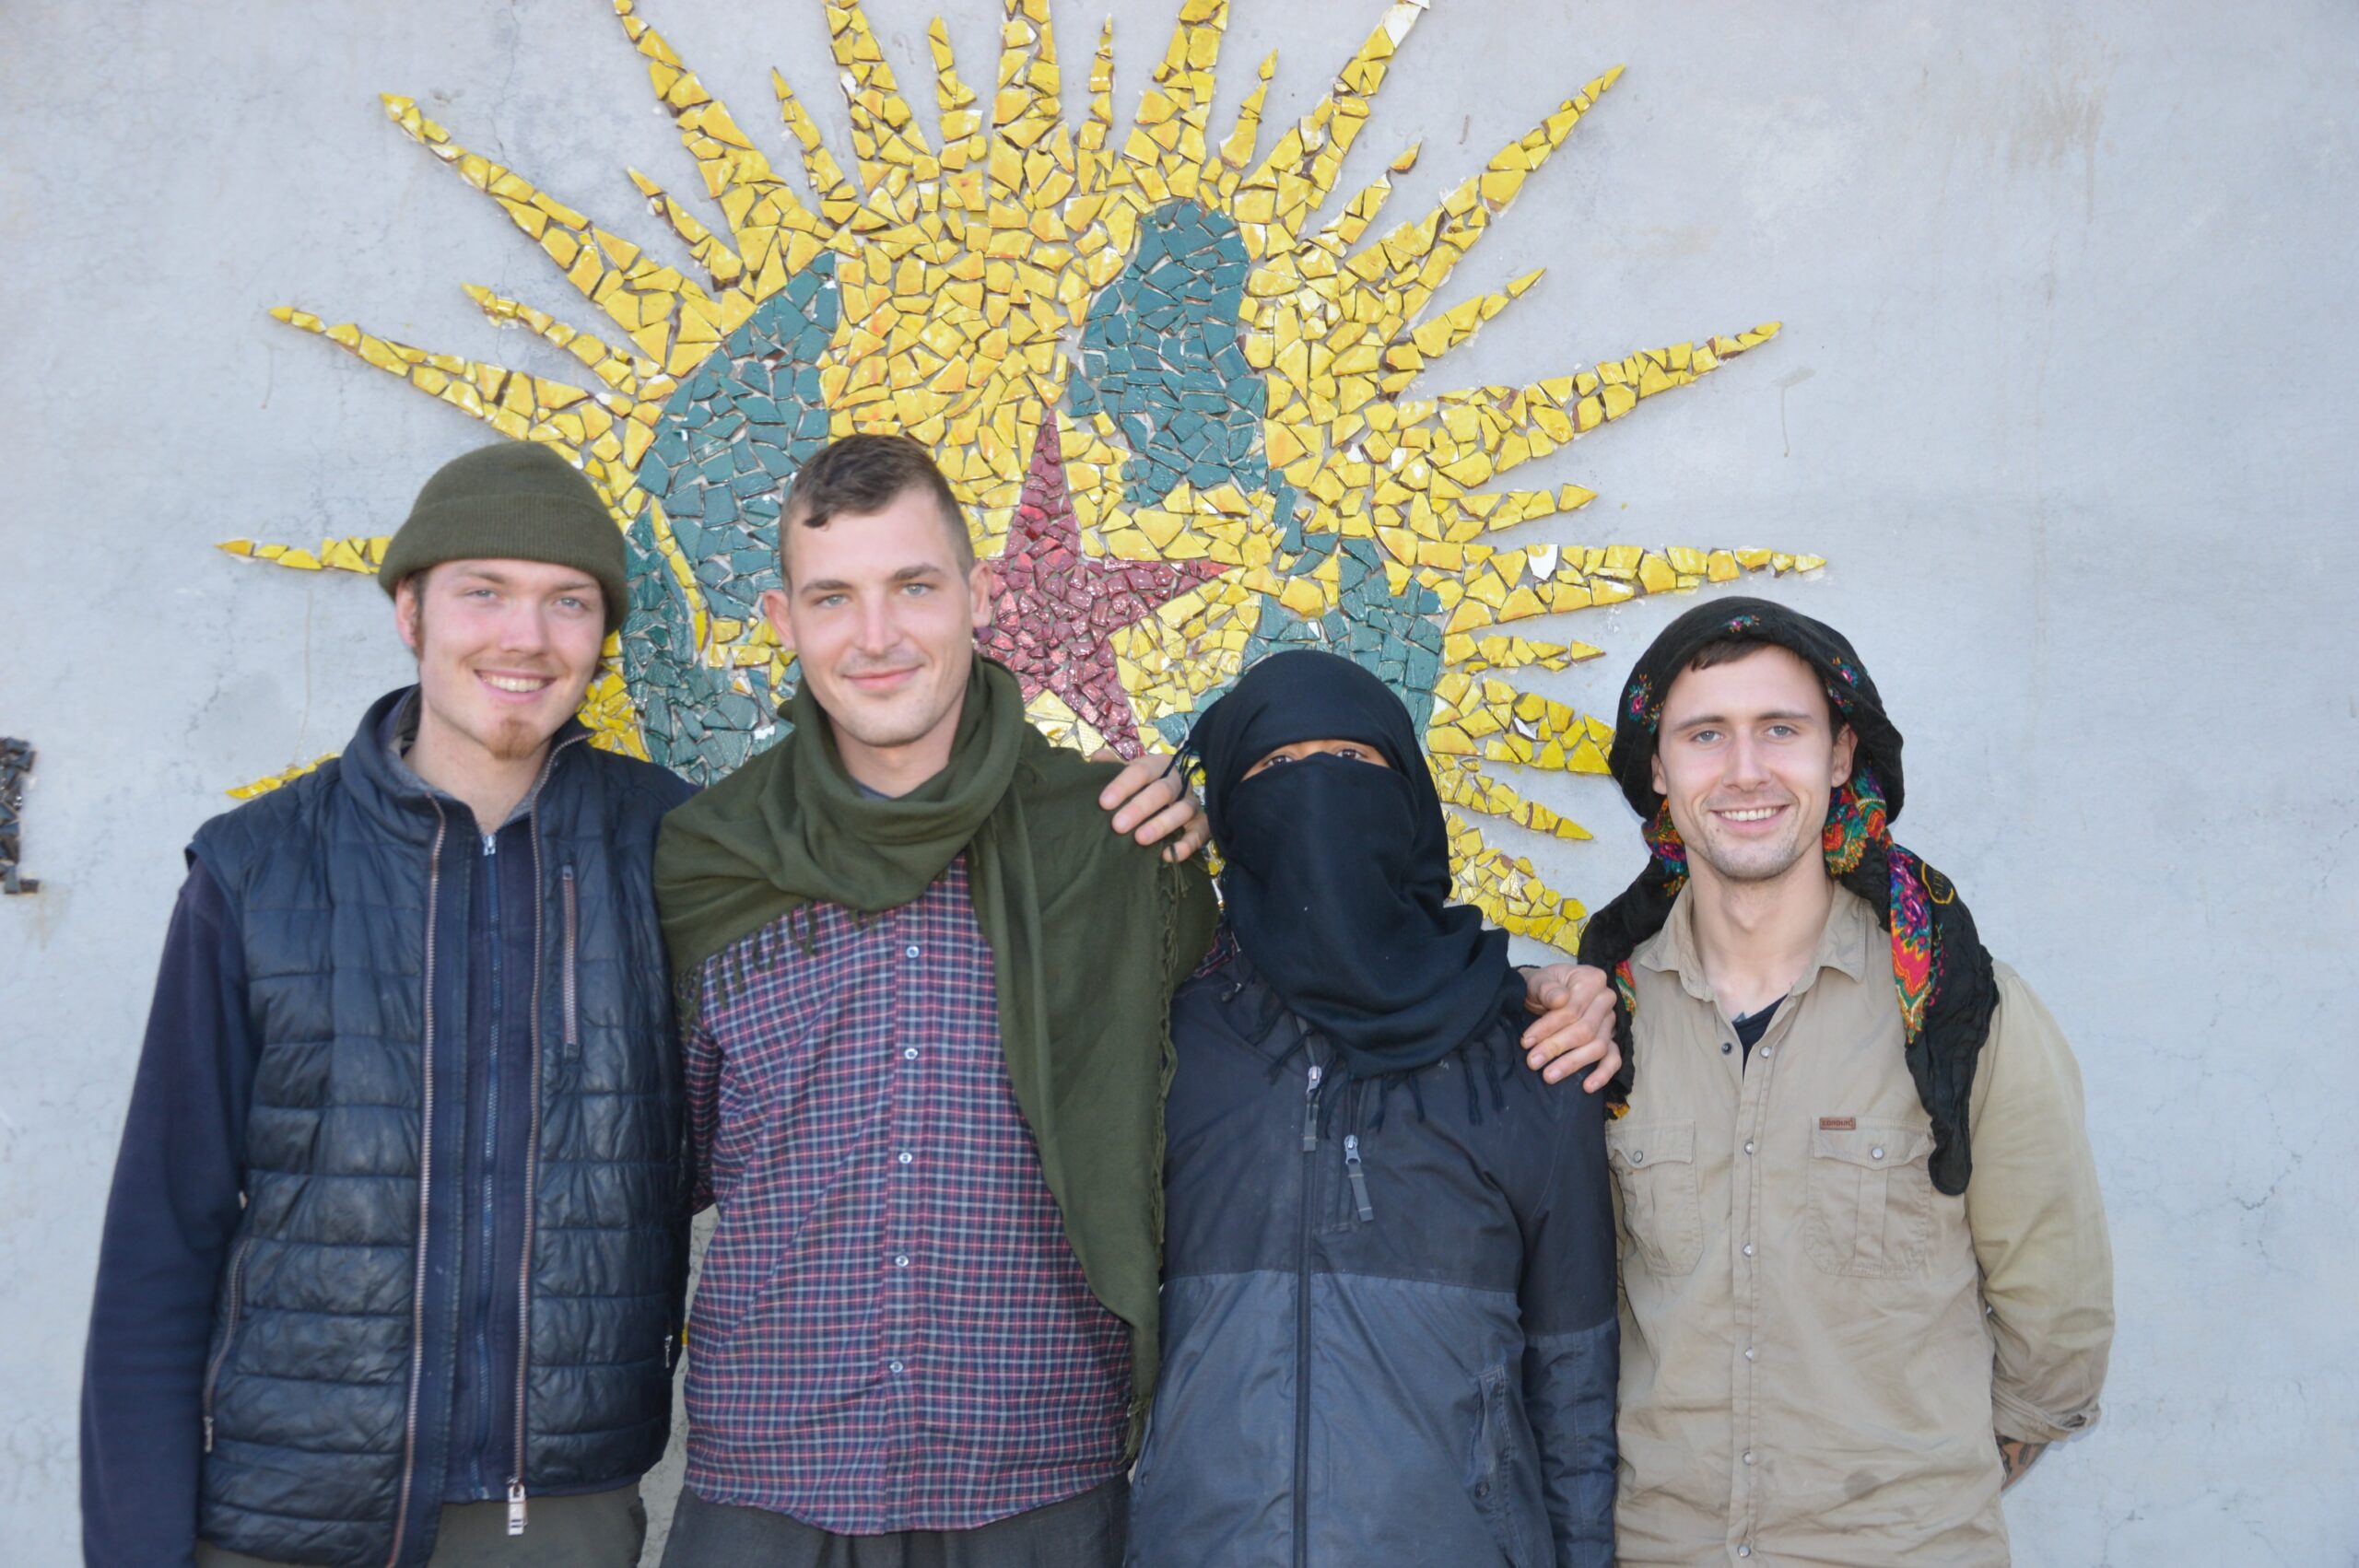 Why coming to Rojava – Interview with members of the Internationalist Youth Commune